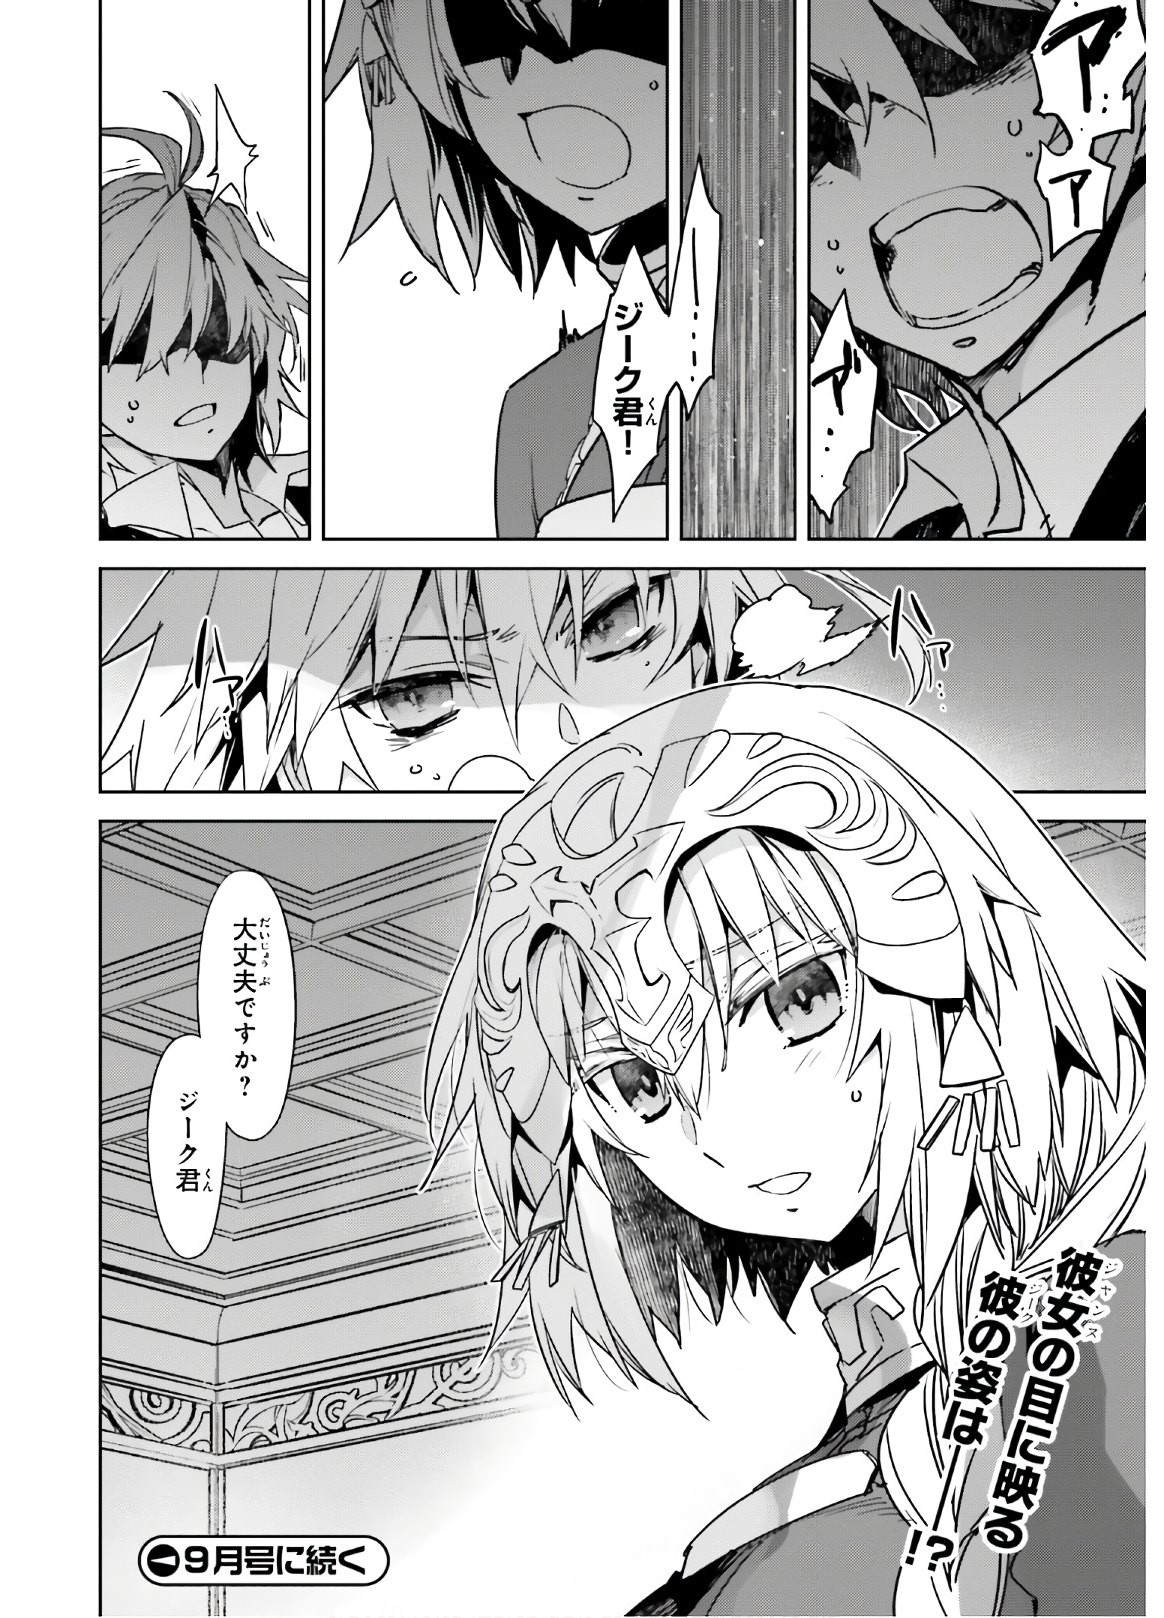 Fate-Apocrypha - Chapter 42-2 - Page 20